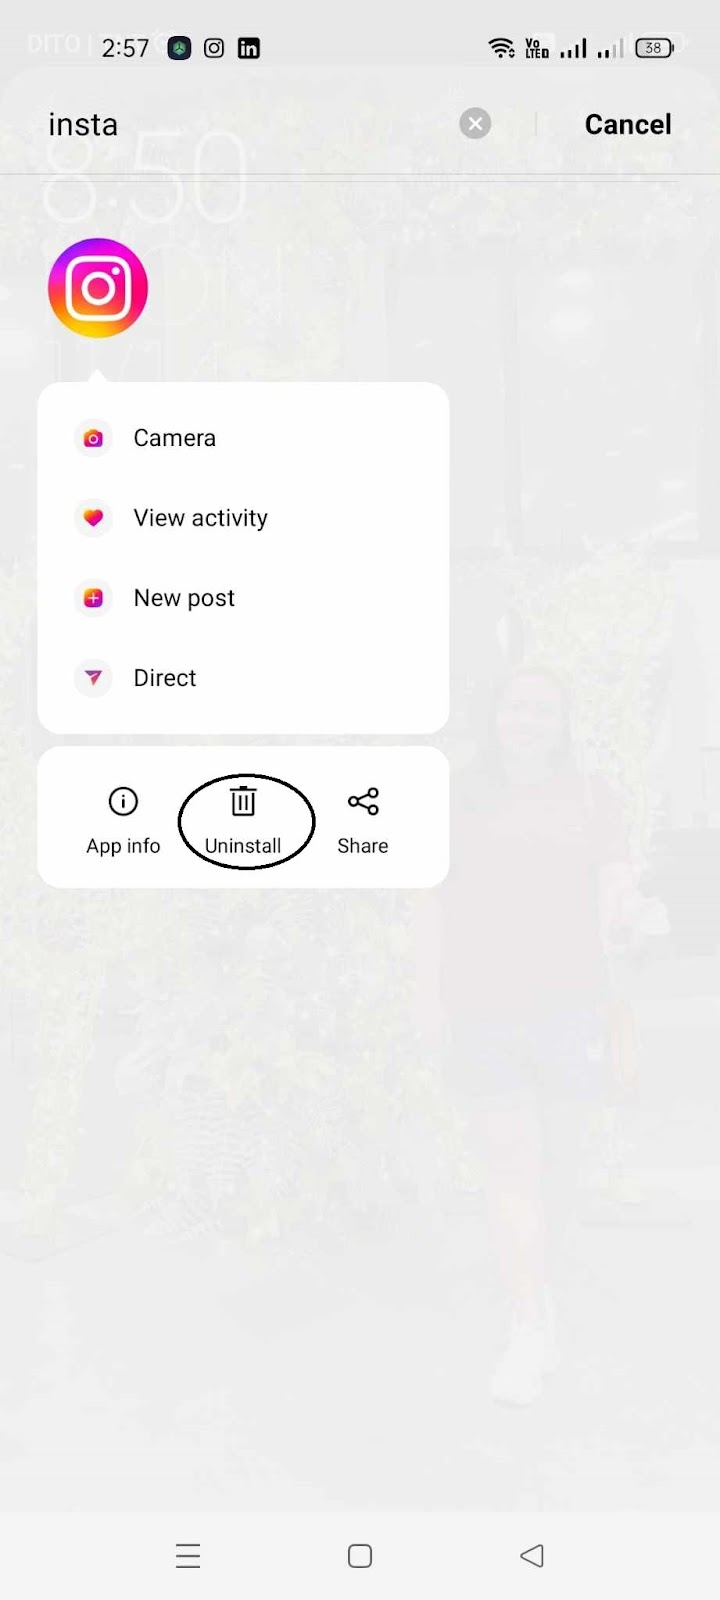 How to fix a Network Request Failed on Instagram - Uninstall Instagram